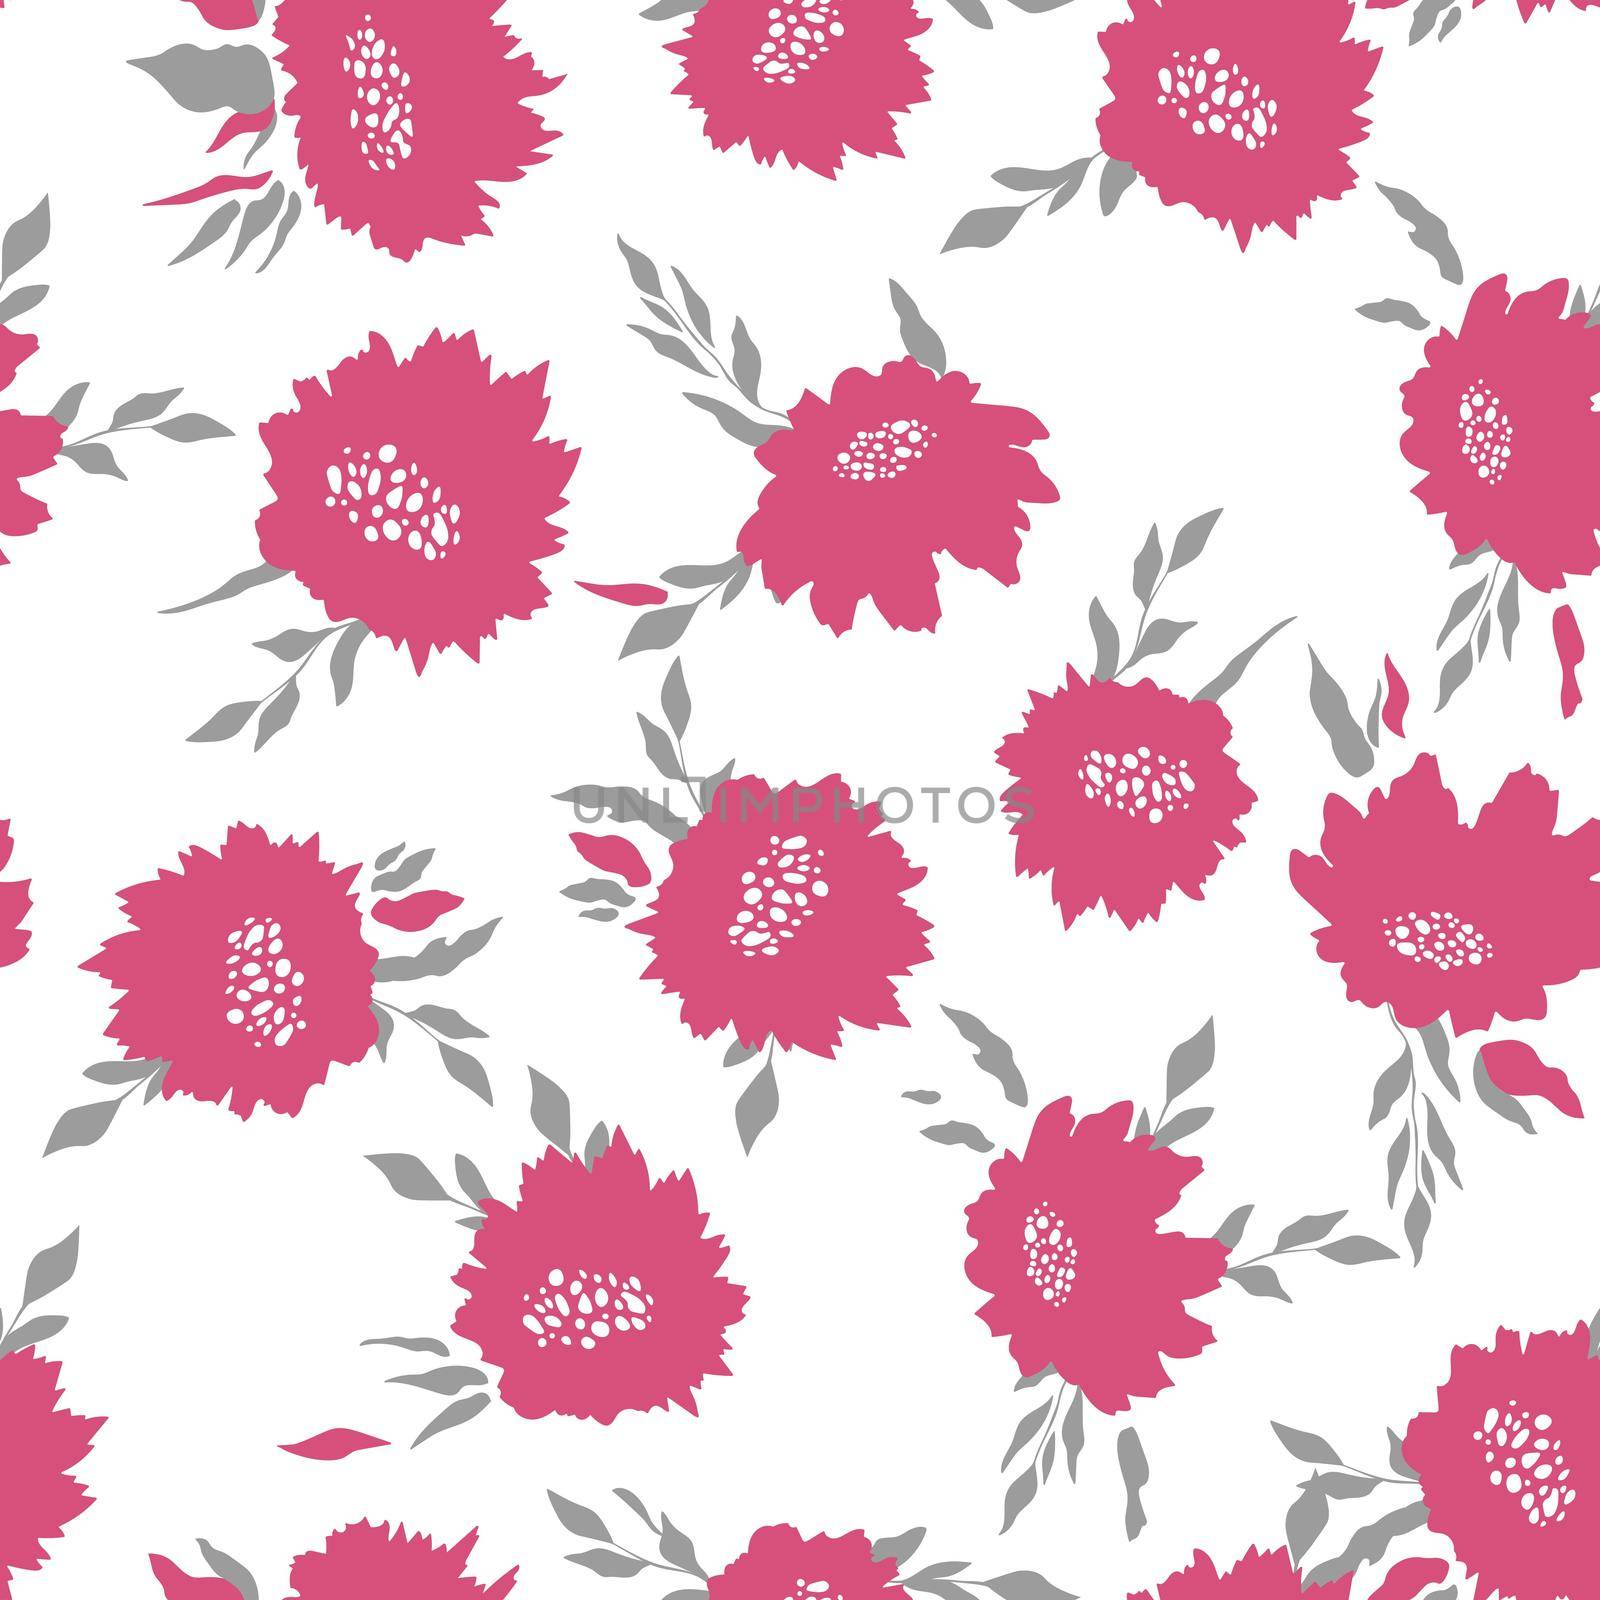 Floral seamless with hand drawn color roses. Cute summer background with flowers and leaves. Modern floral compositions. Fashion vector stock illustration for wallpaper, posters, card, fabric,textile.